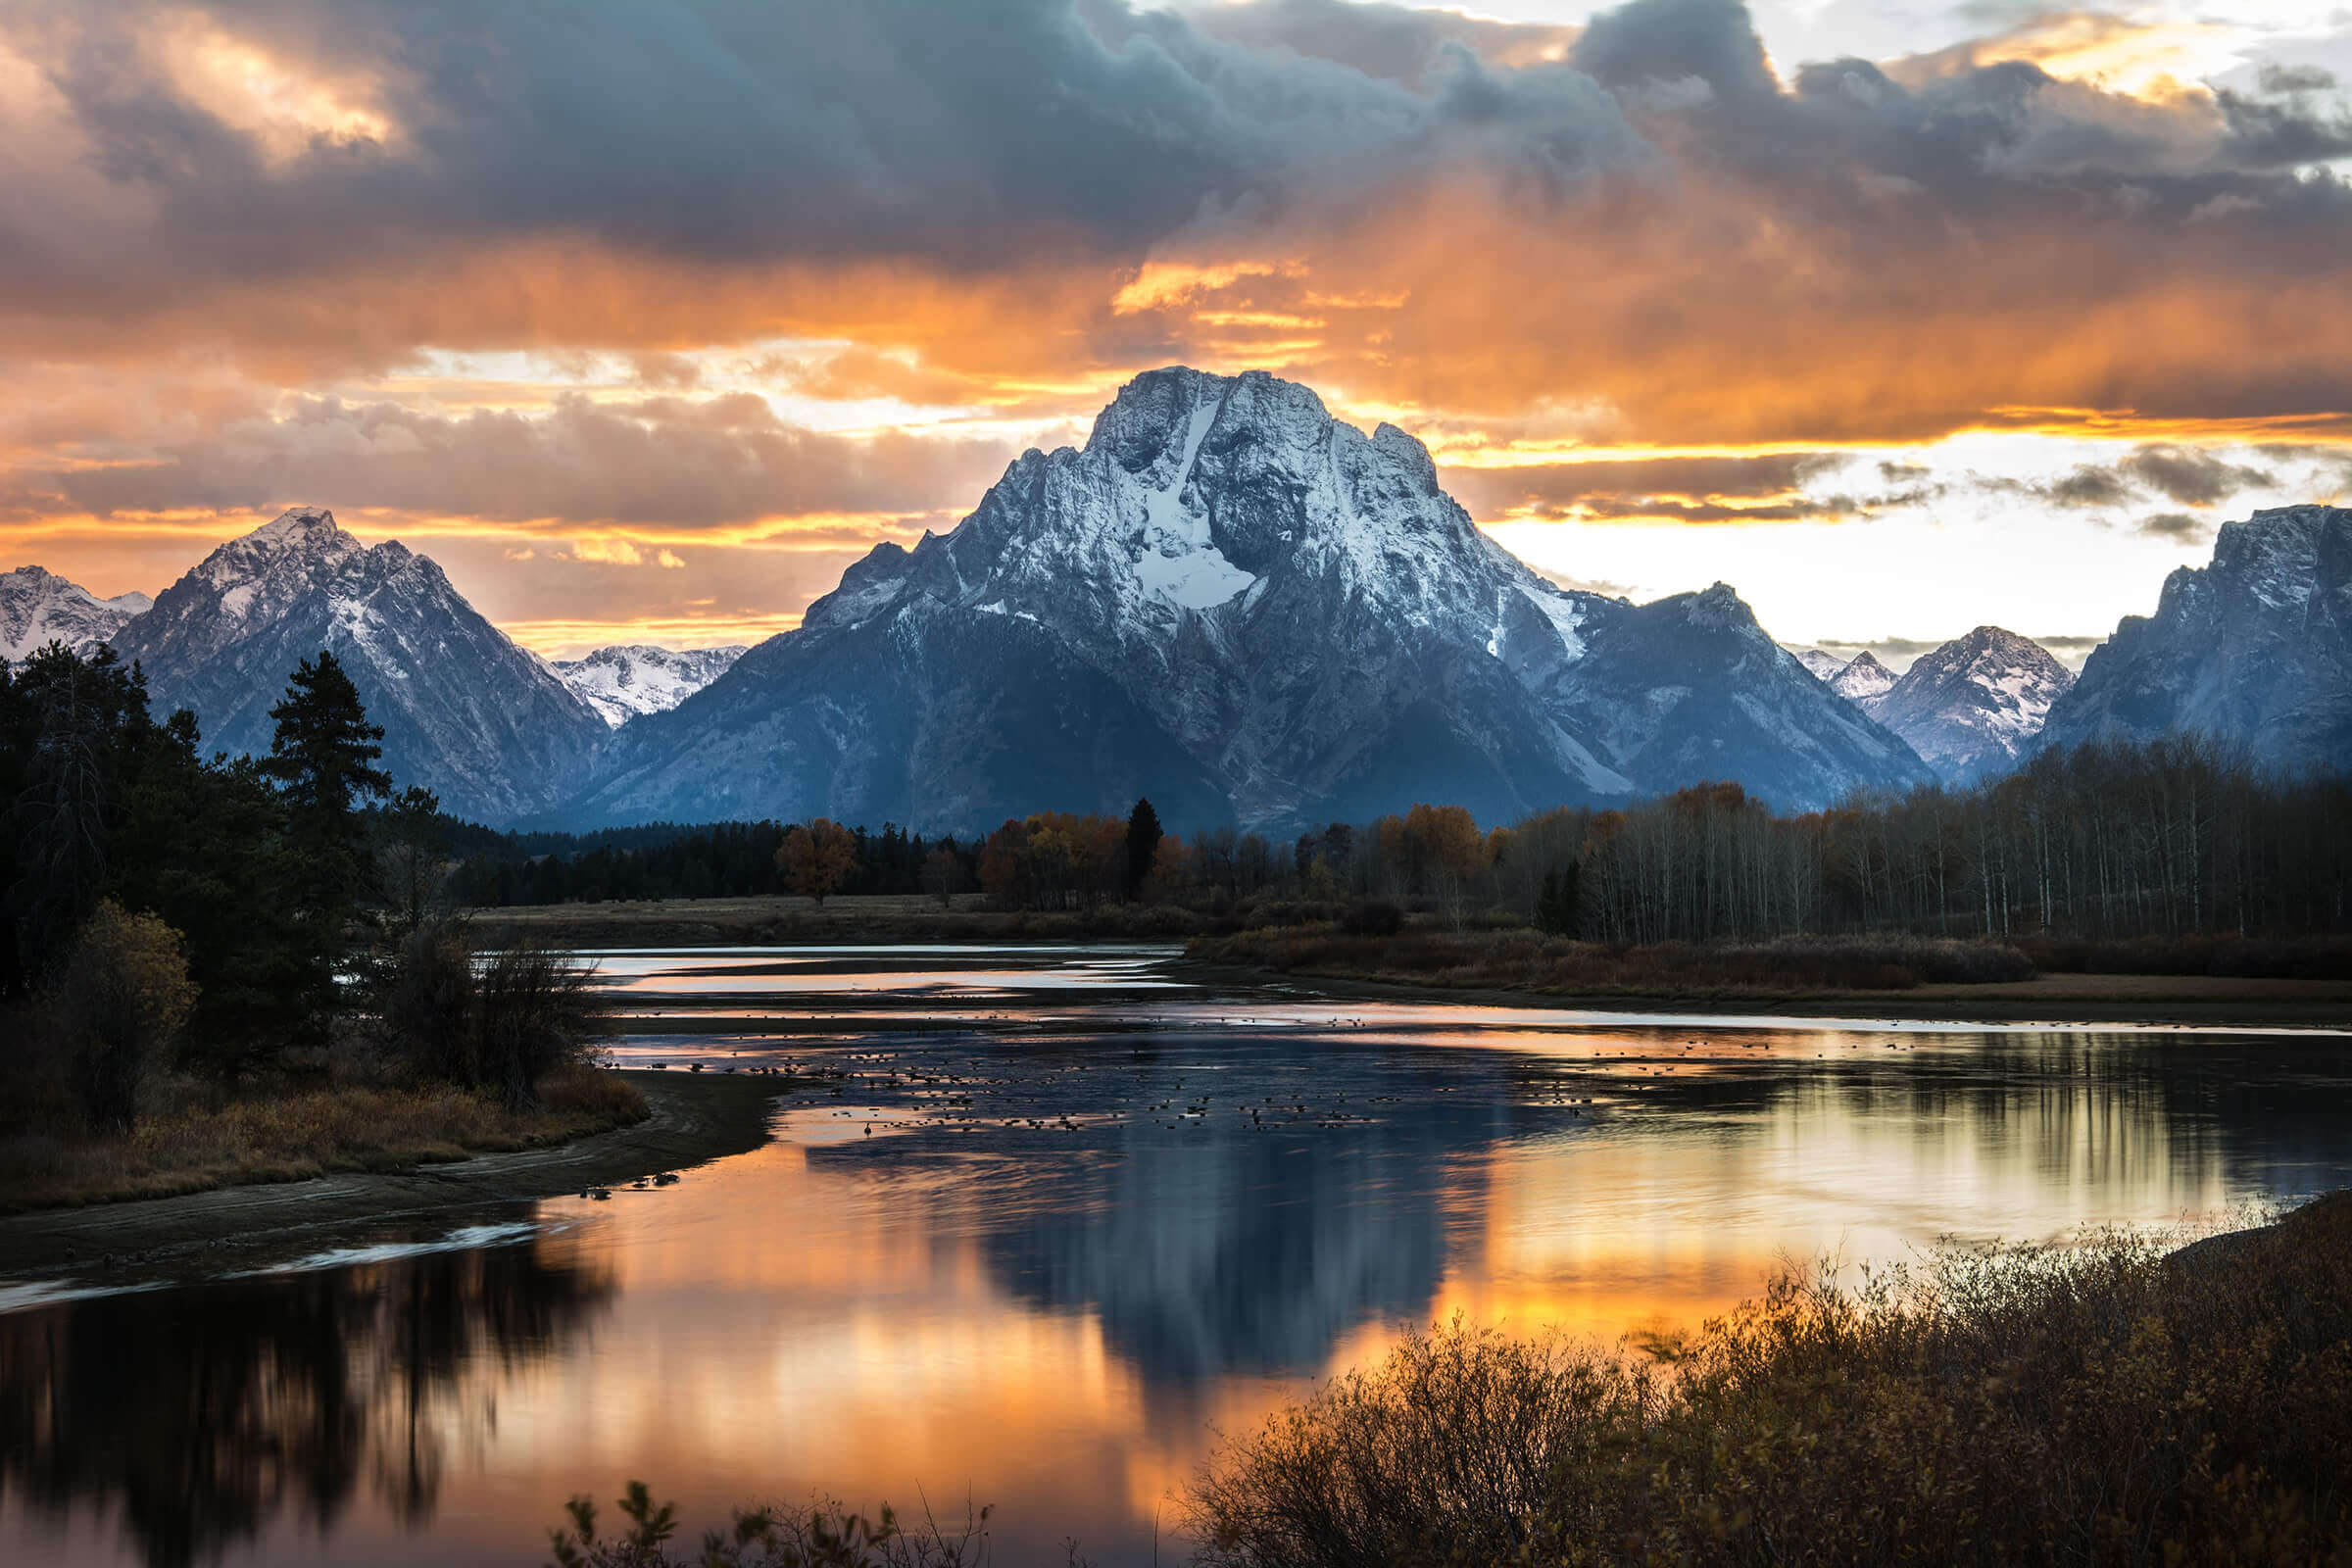 Stock photo of Oxbow Bend in Grand Teton National Park at sunset